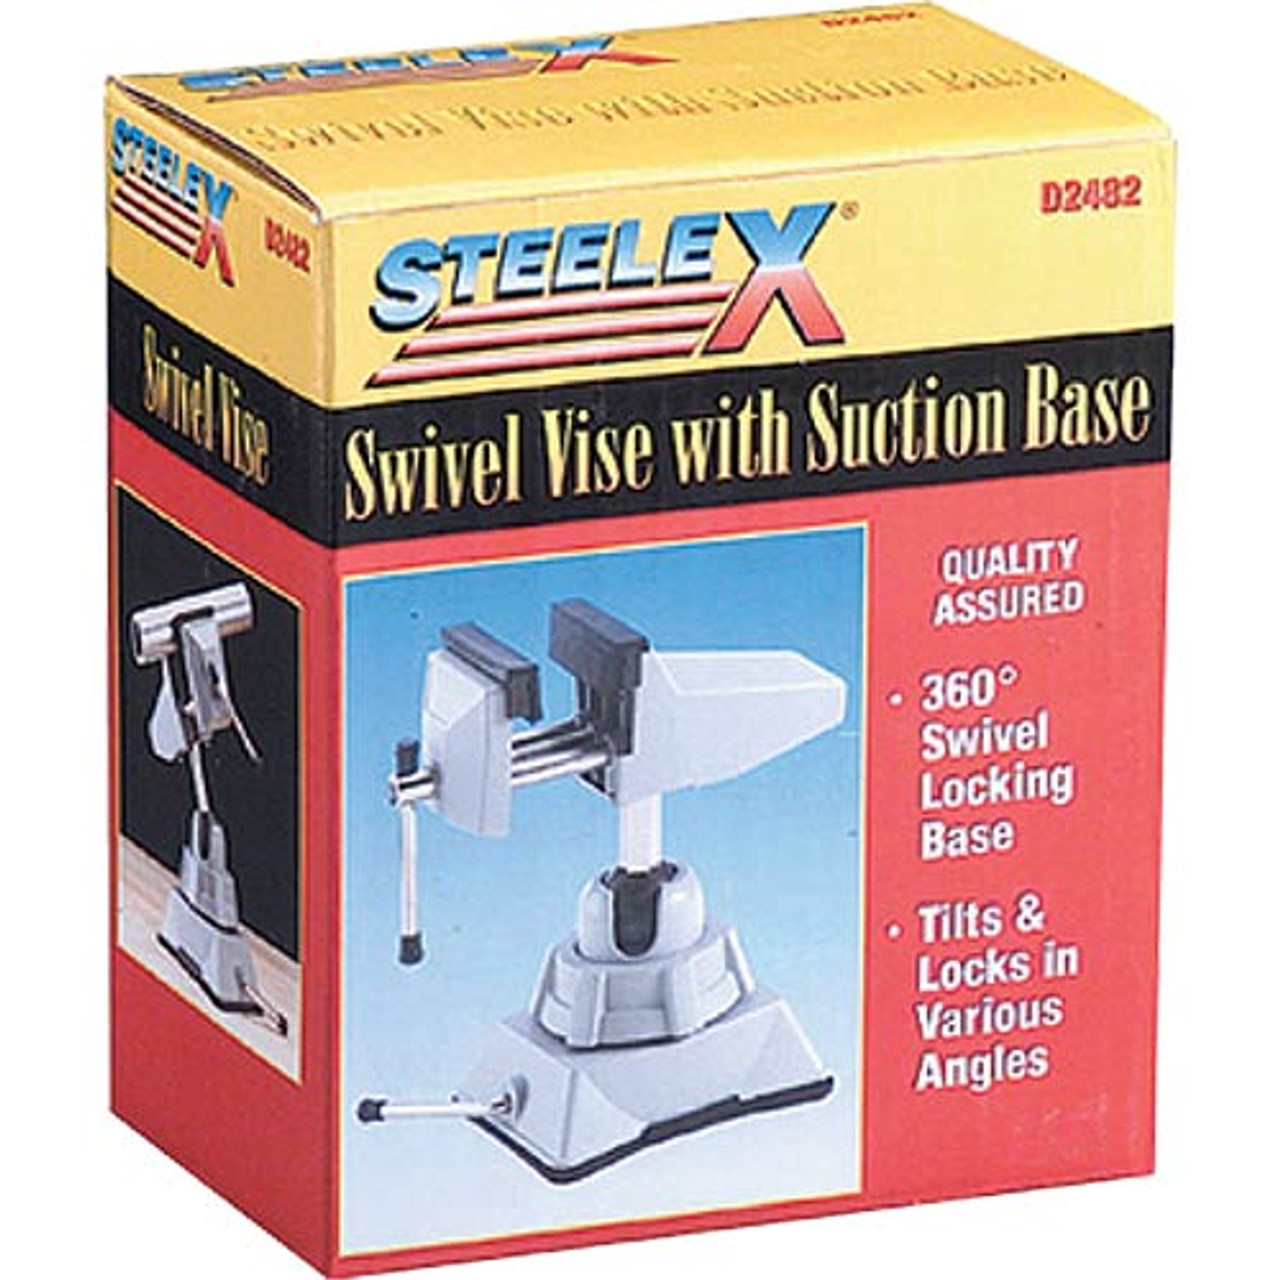 Woodstock Steelex Multi-Positioning Hobby Vise-Suction D2482